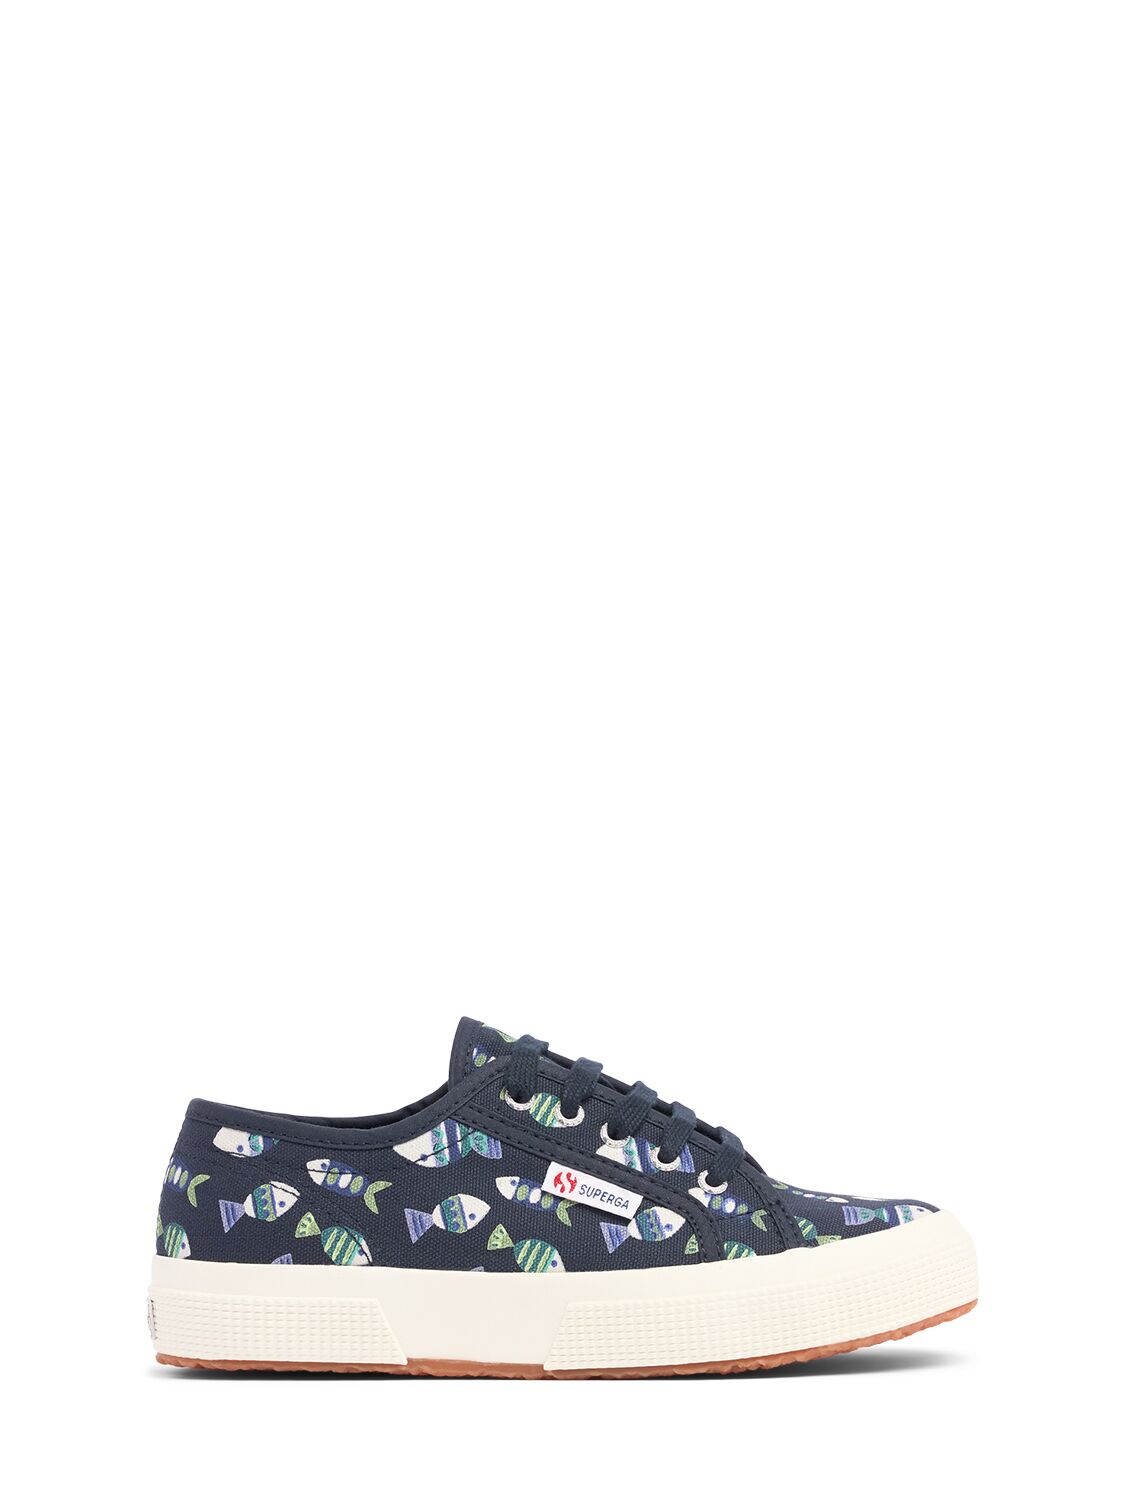 Superga Kids' Fish Printed Cotton Canvas Sneakers In Navy